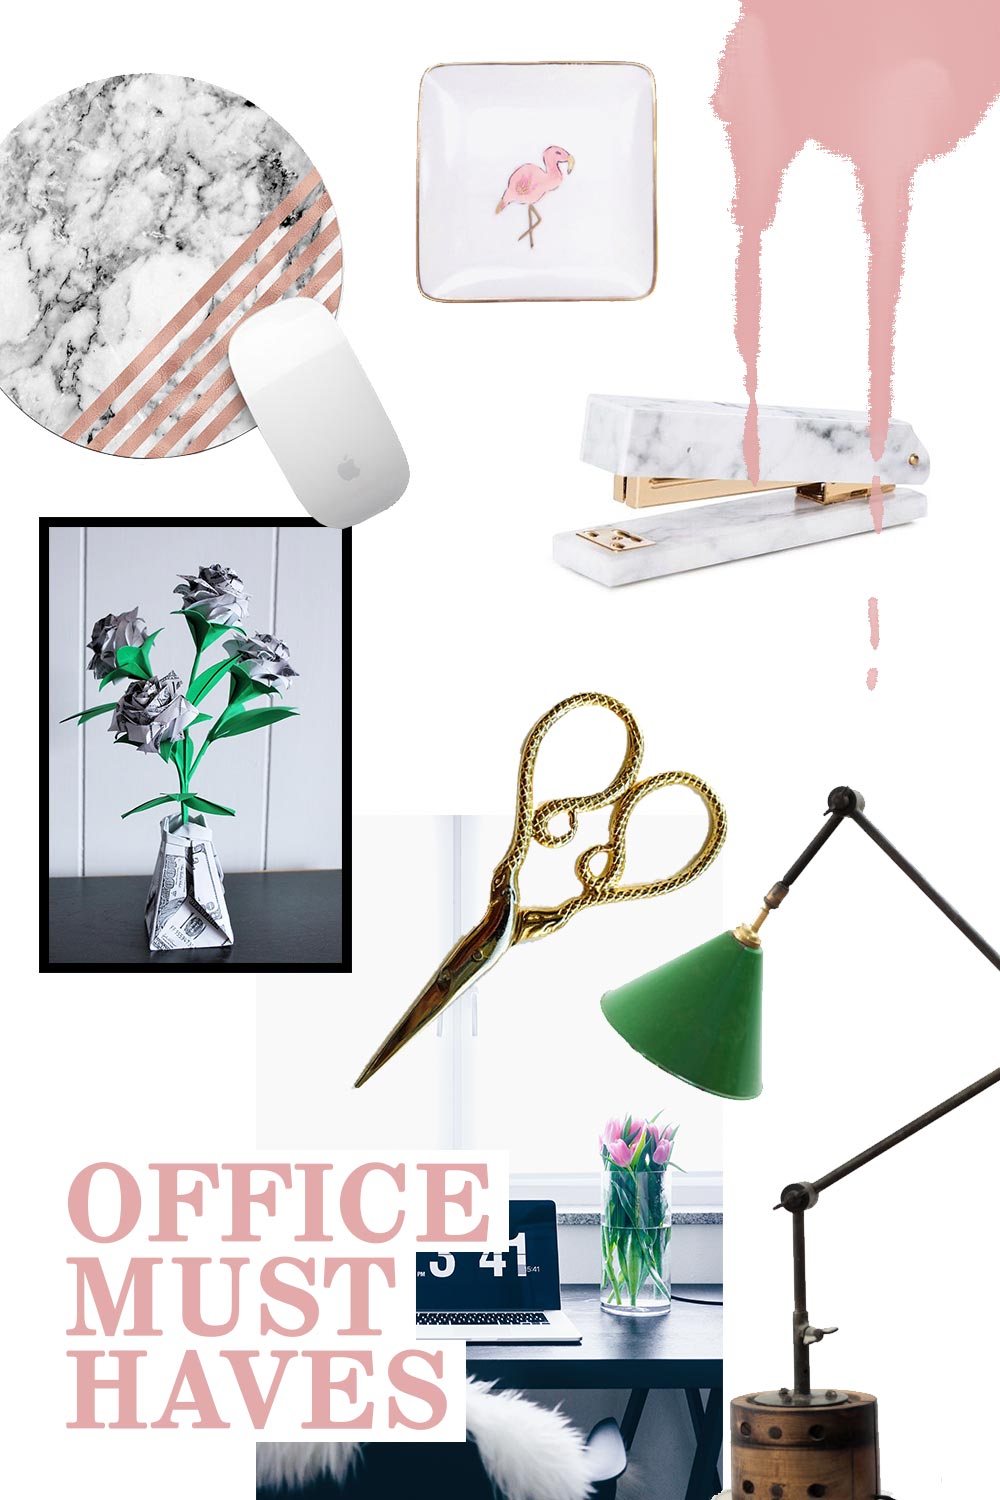 Office Must Haves, Home Office Stationary, Office IT Pieces, Etsy Picks, Interior Blog, Interior Magazin, www.whoismocca.com